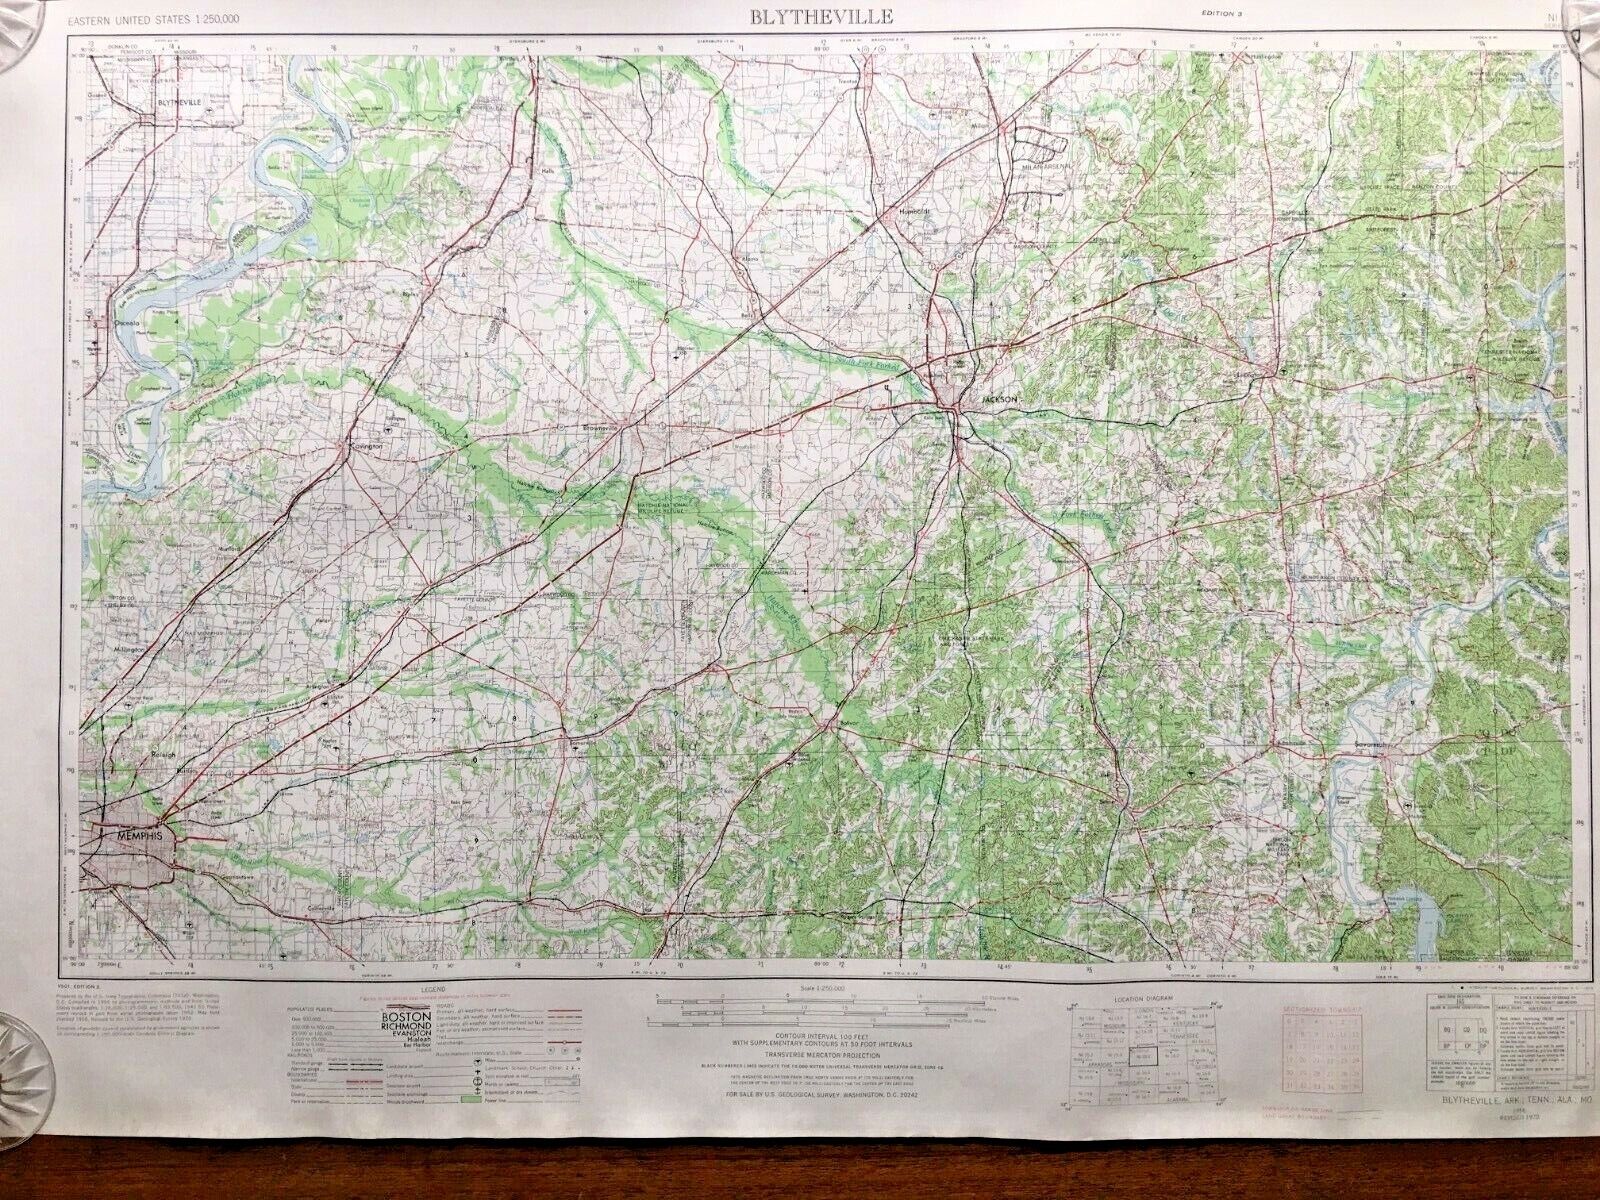 1970 BLYTHEVILLE,ARK. TENN  ALA & MO.Topographical Map by The Army Topograhical 